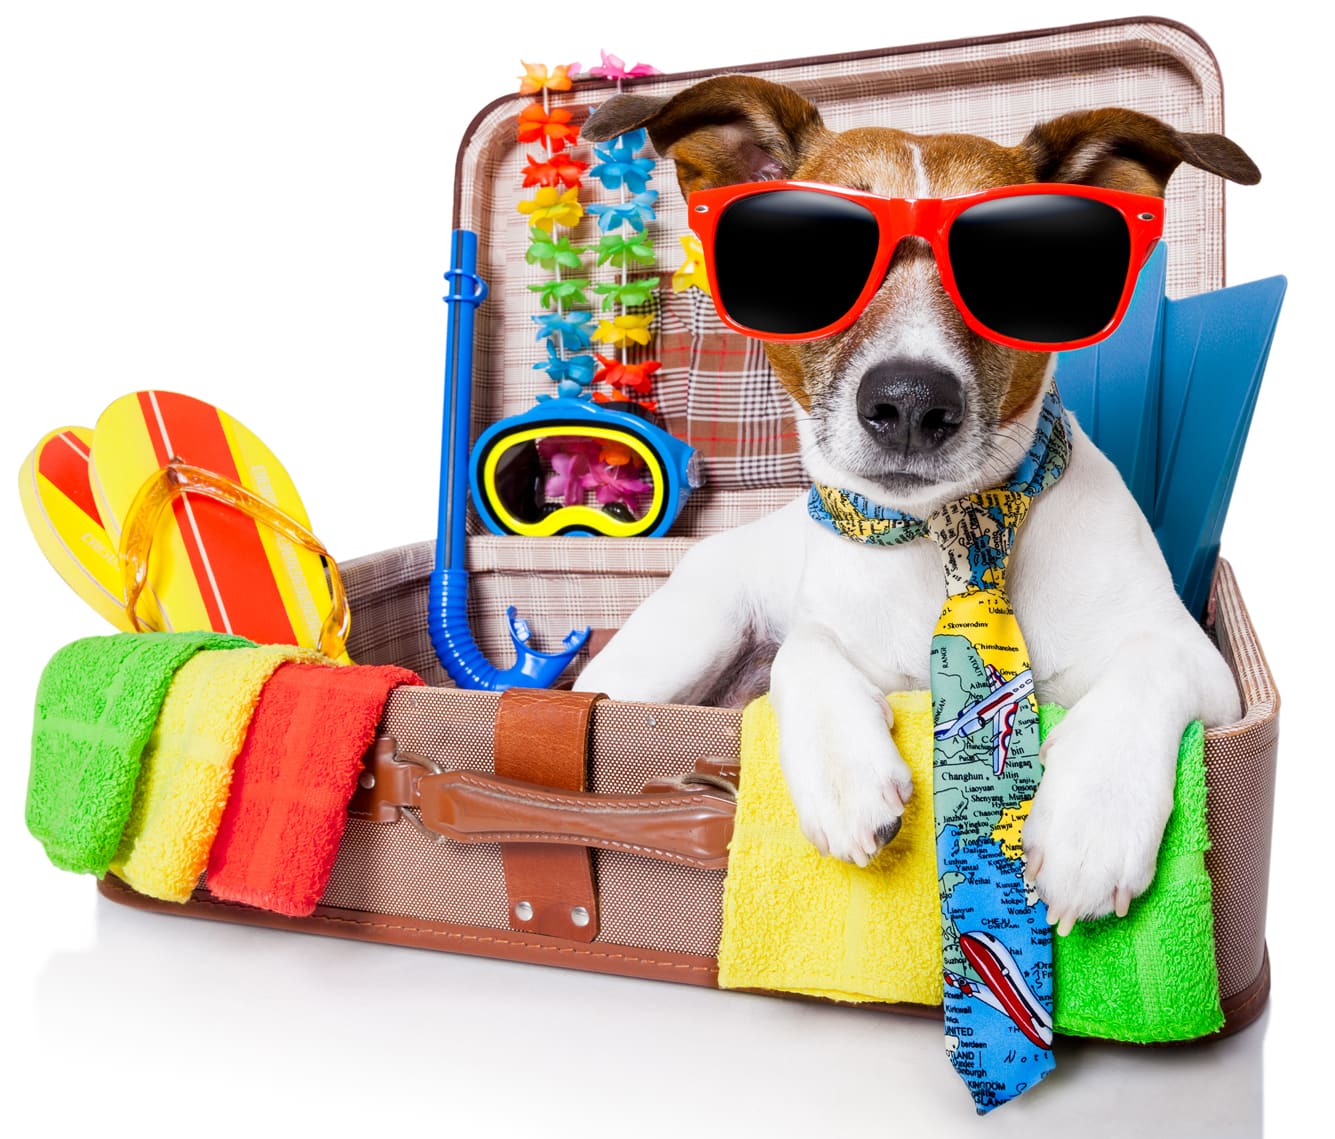 Summer Vacation Ideas that Include Your Dog -